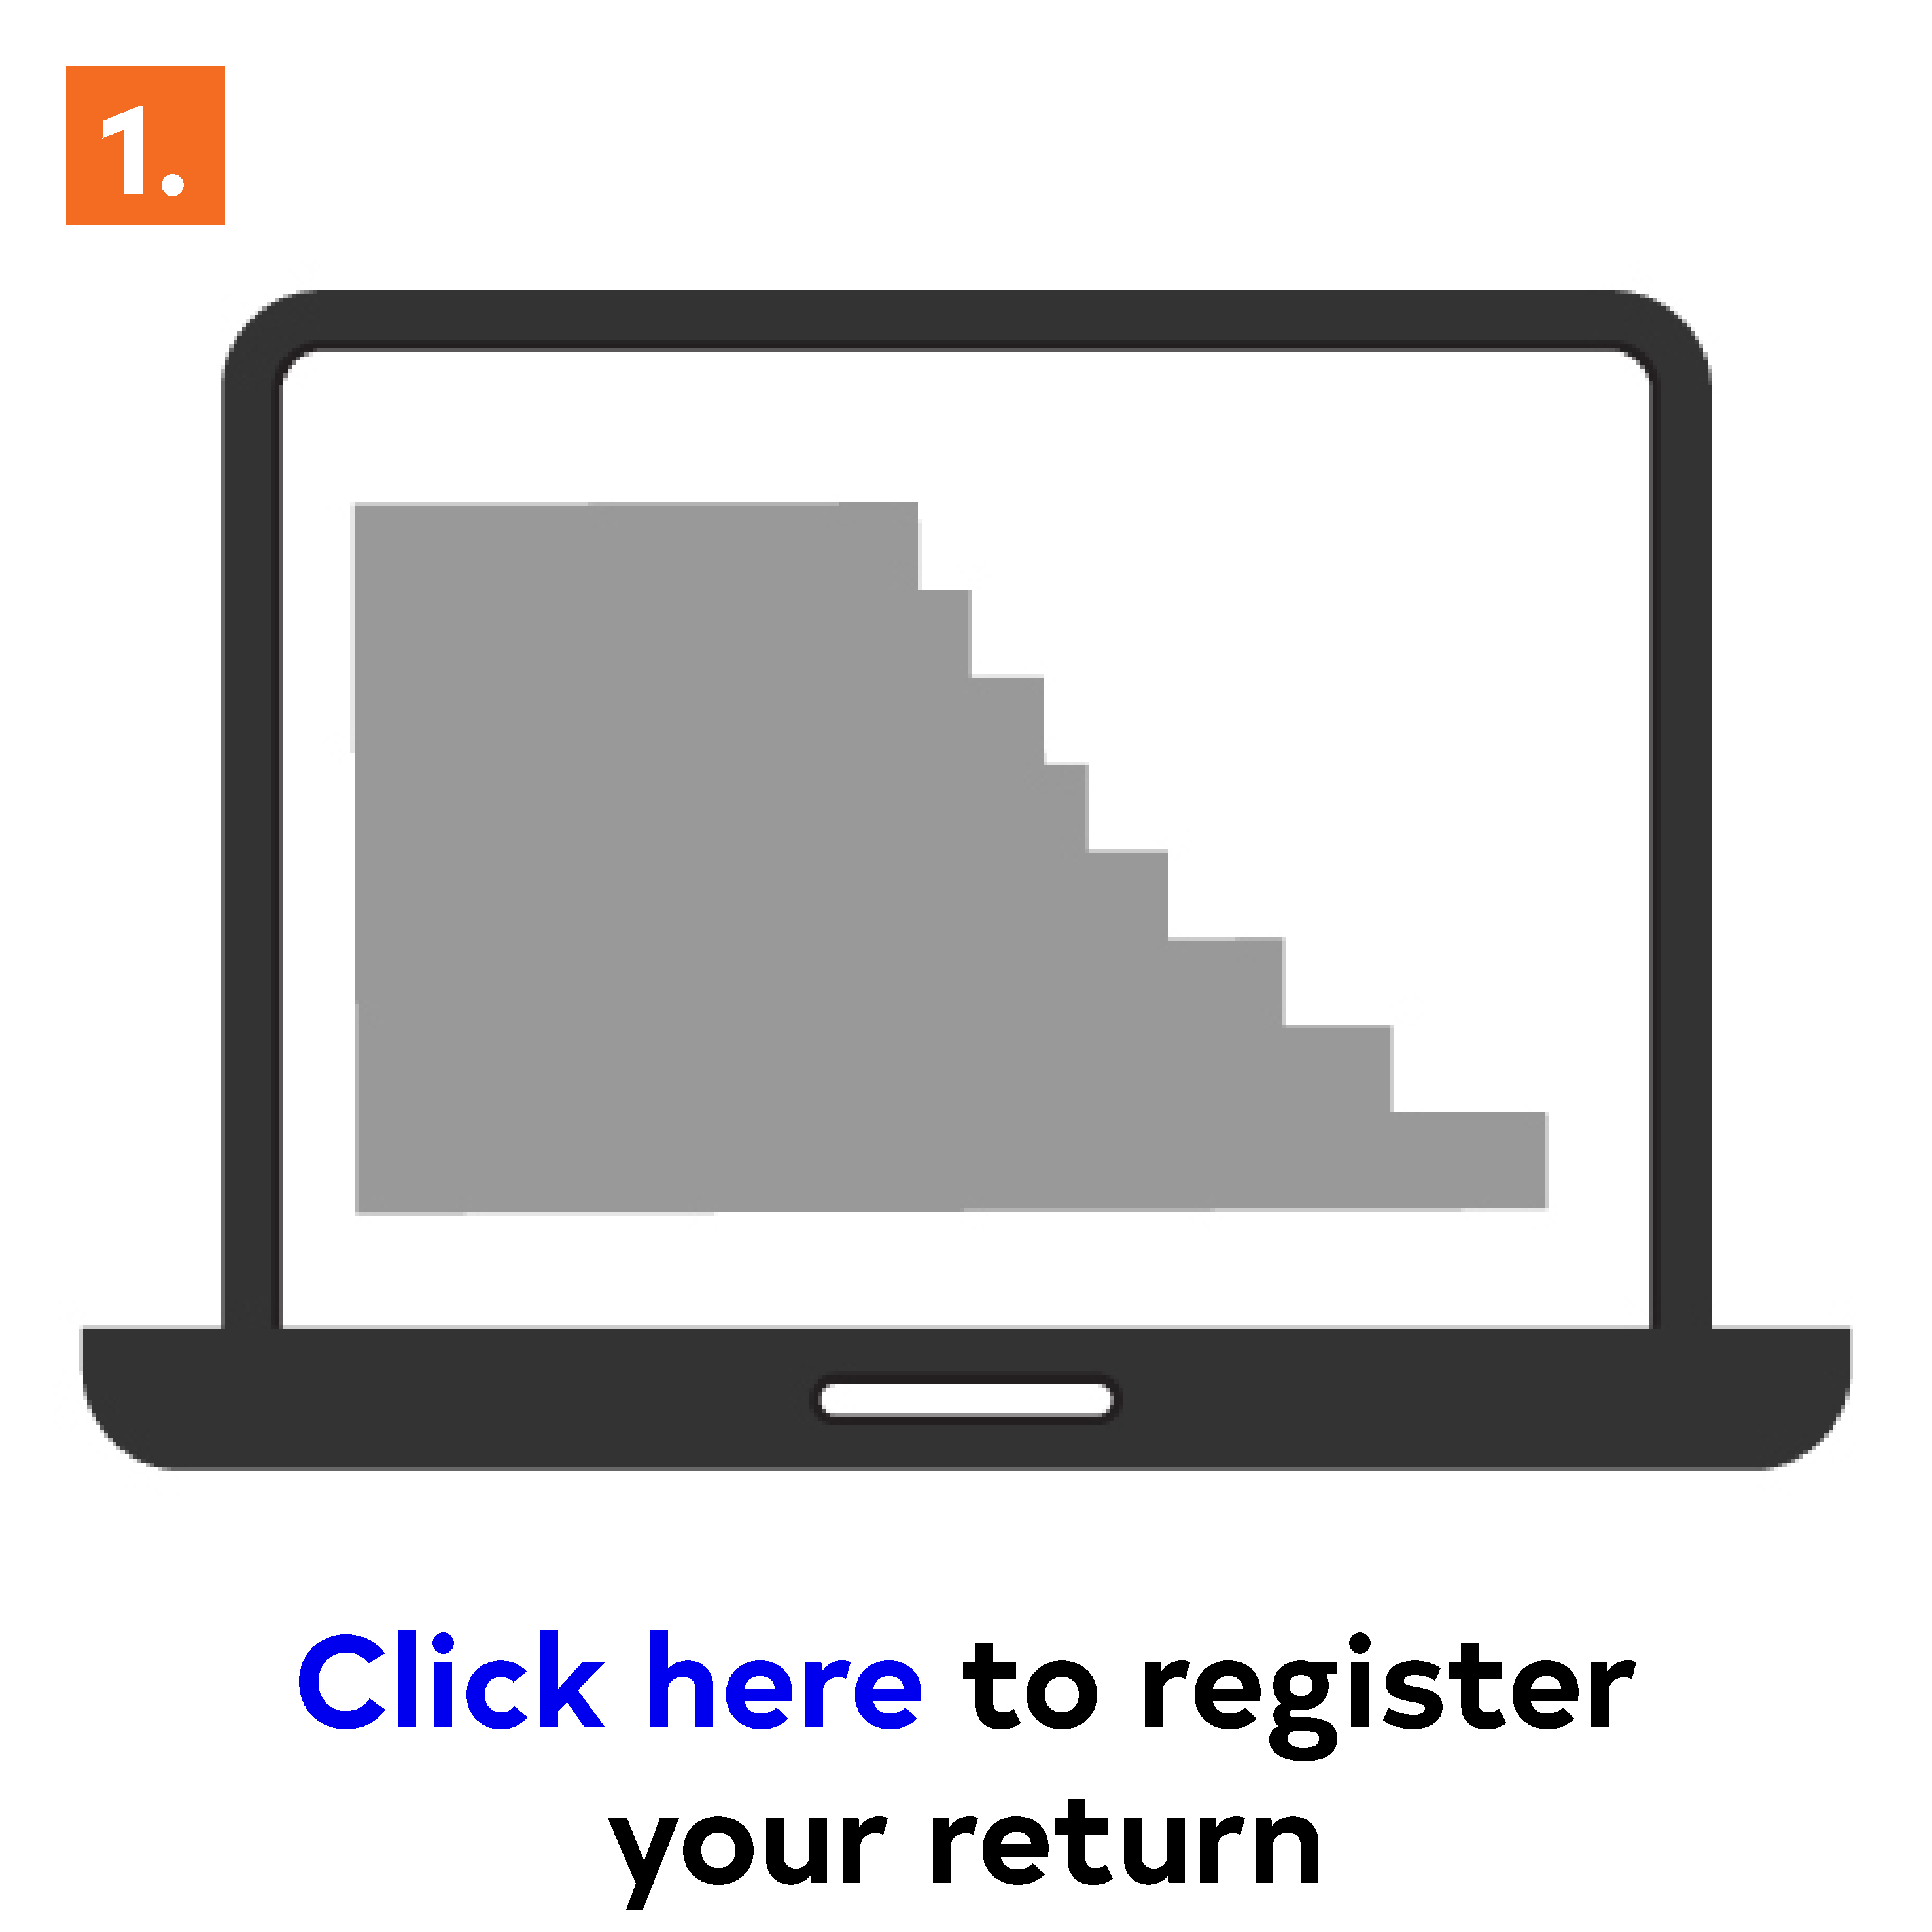 click-here-to-register-your-details